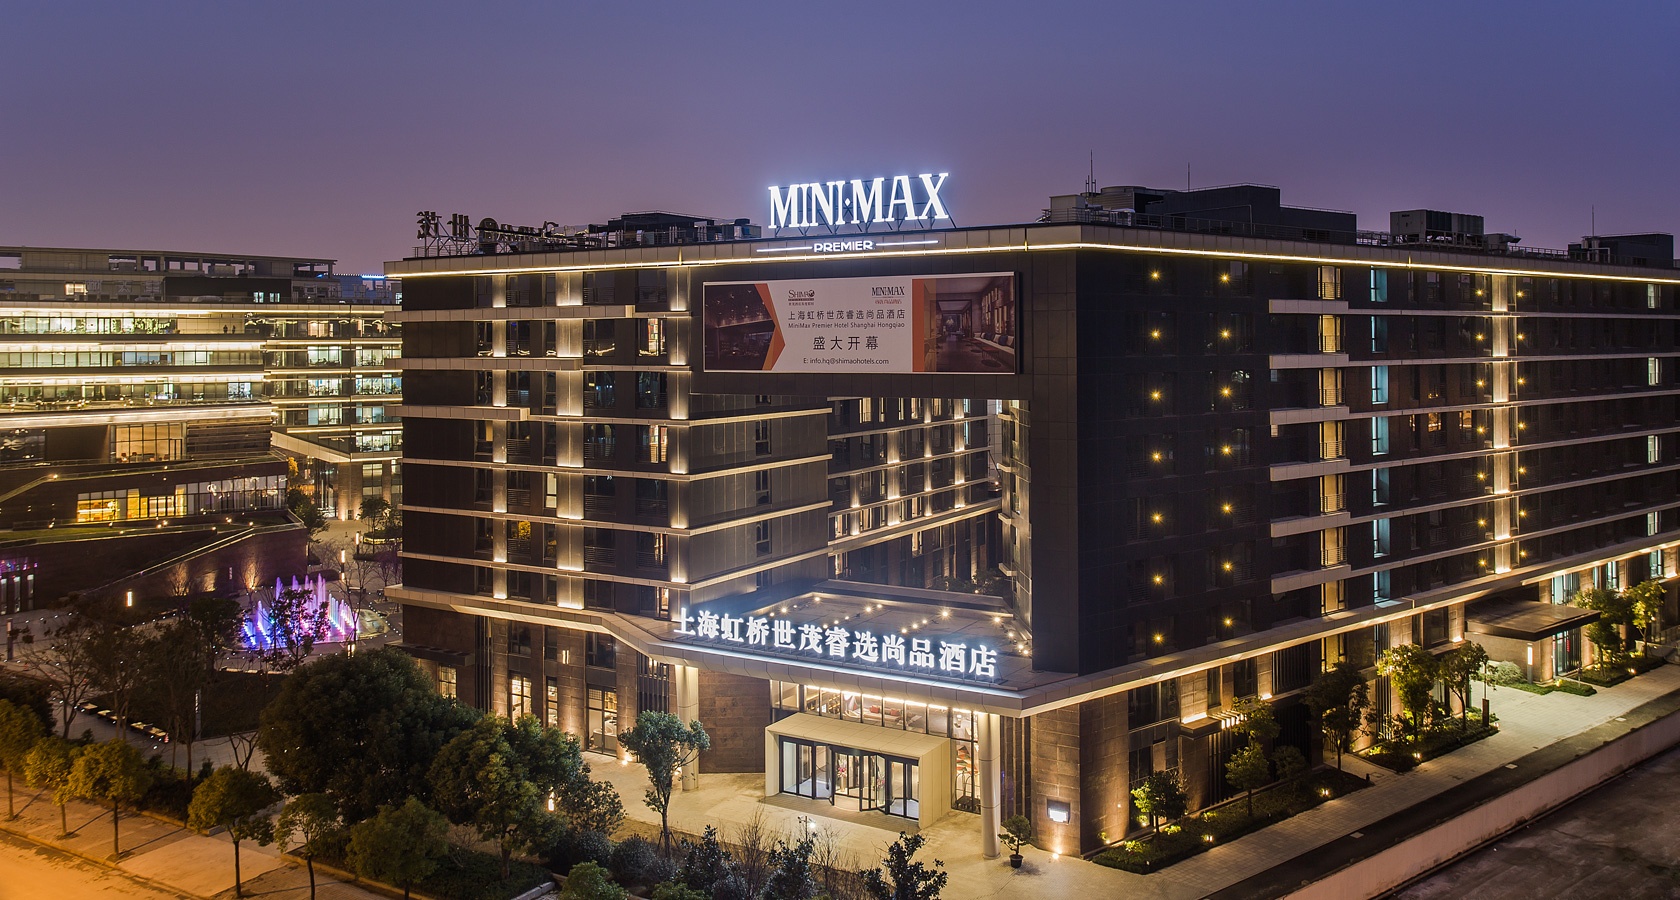 MiniMax Premier Hotel in China launches mobile key